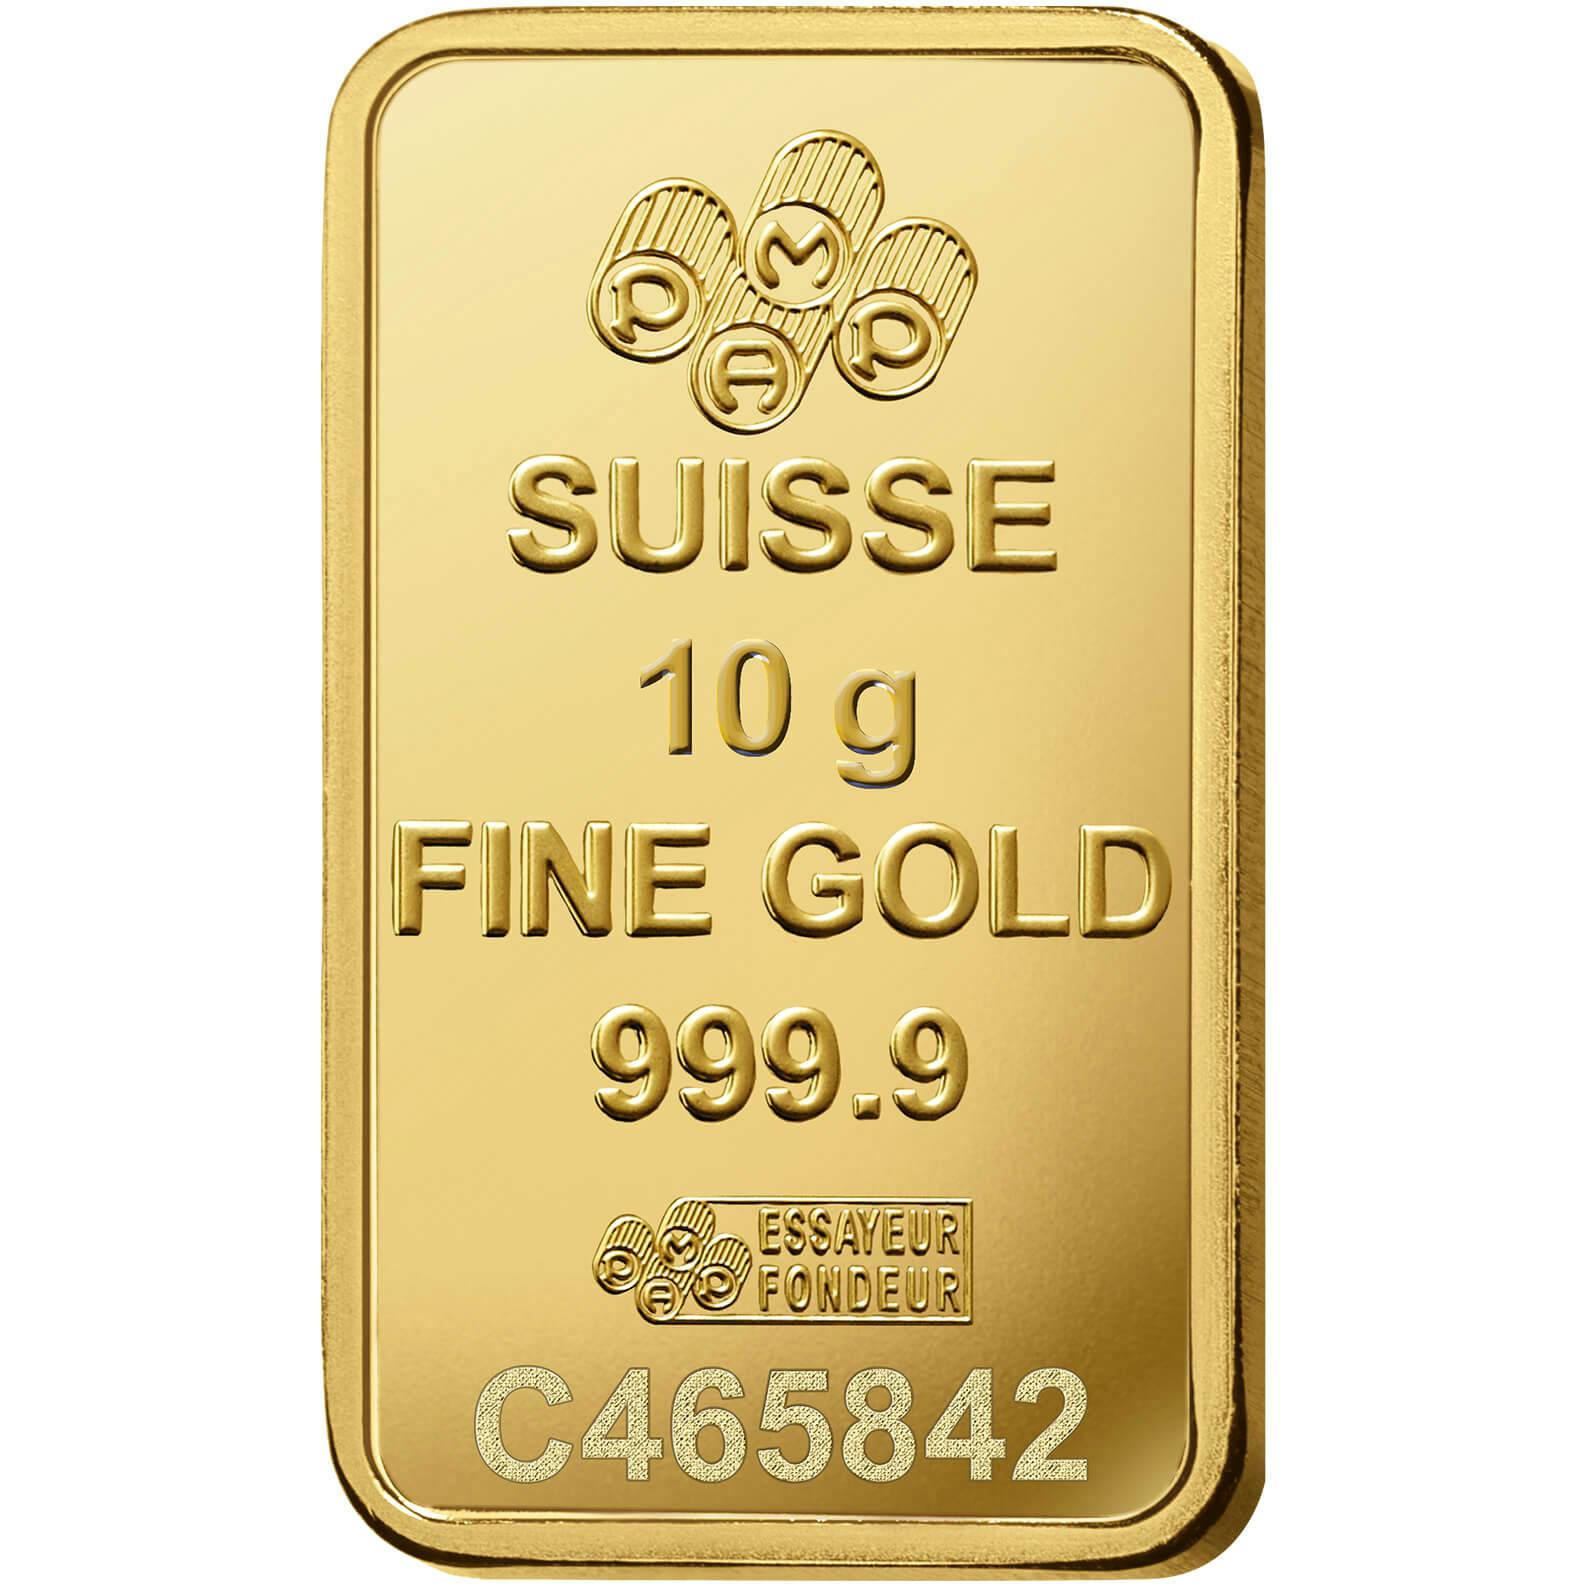 Invest in 10 gram Fine Gold Liberty - PAMP Swiss - Back